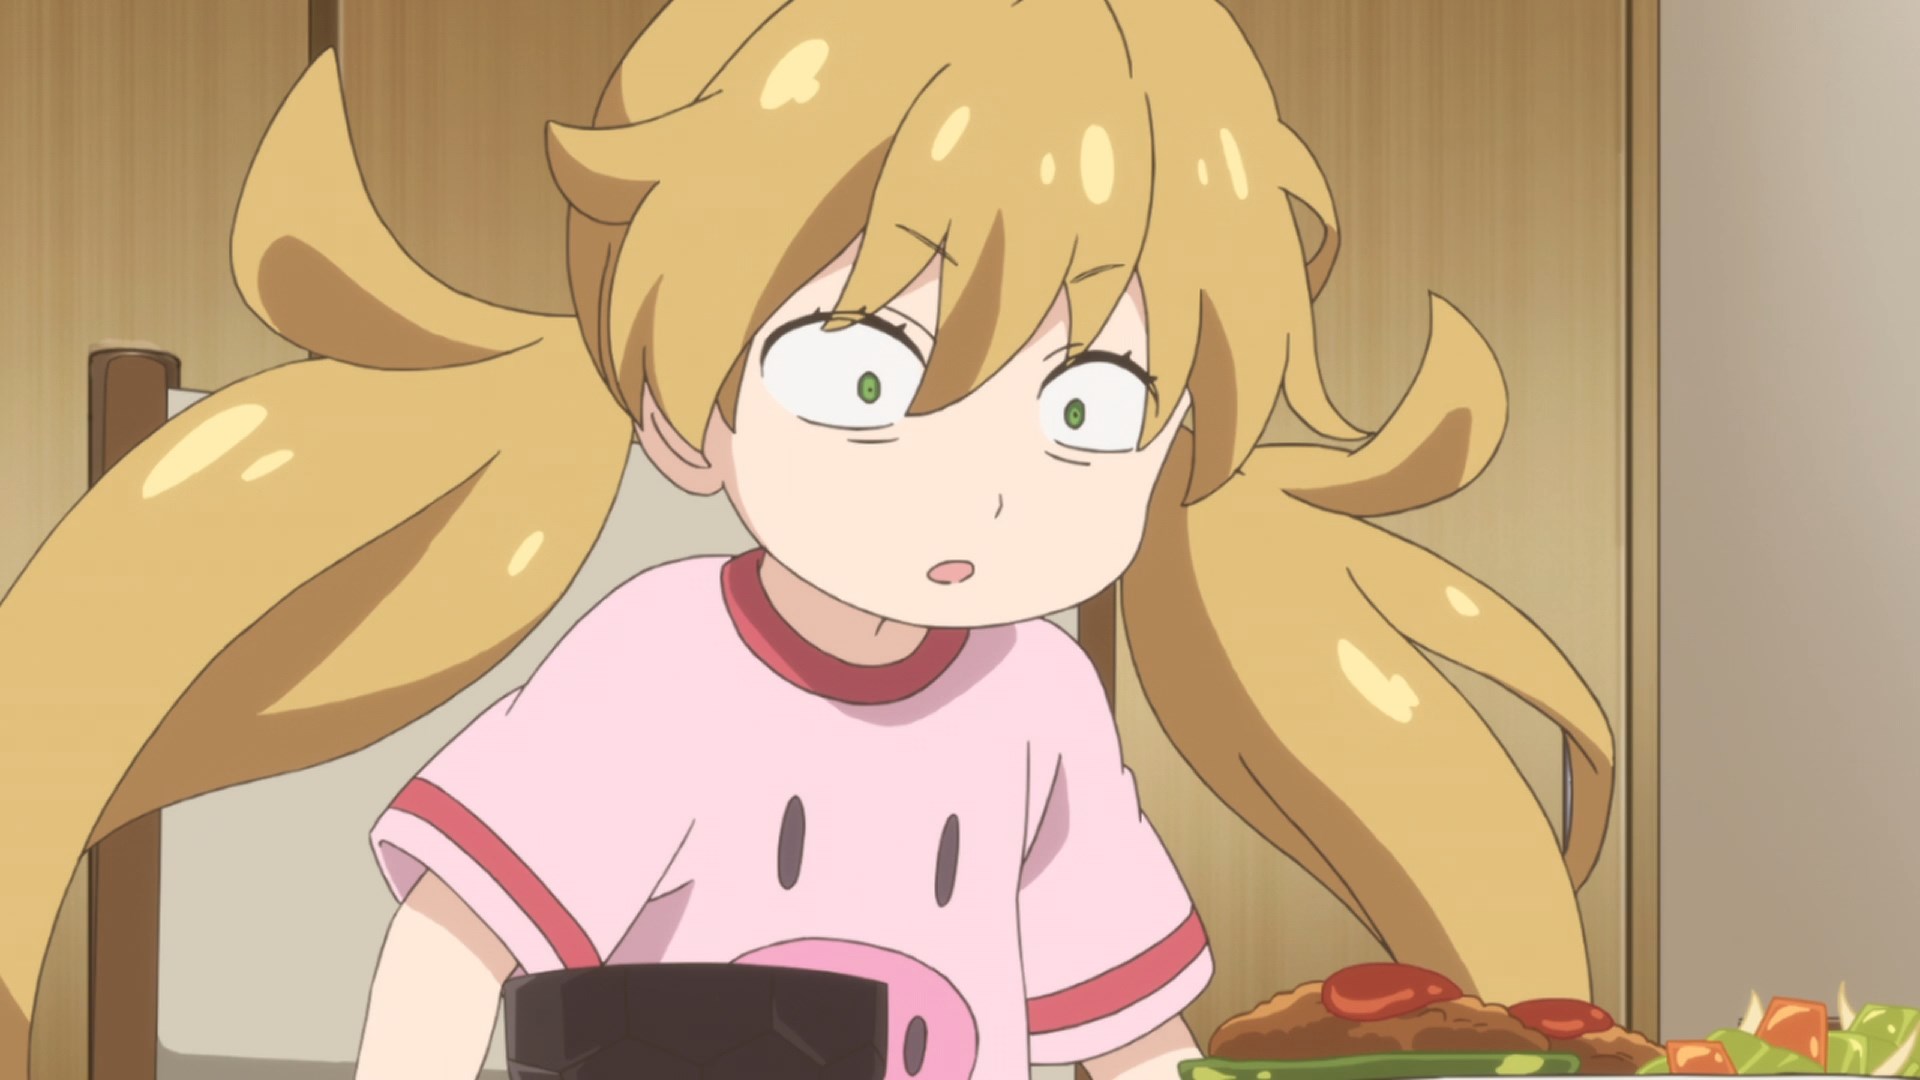 Sweetness And Lightning Backgrounds, Compatible - PC, Mobile, Gadgets| 1920x1080 px